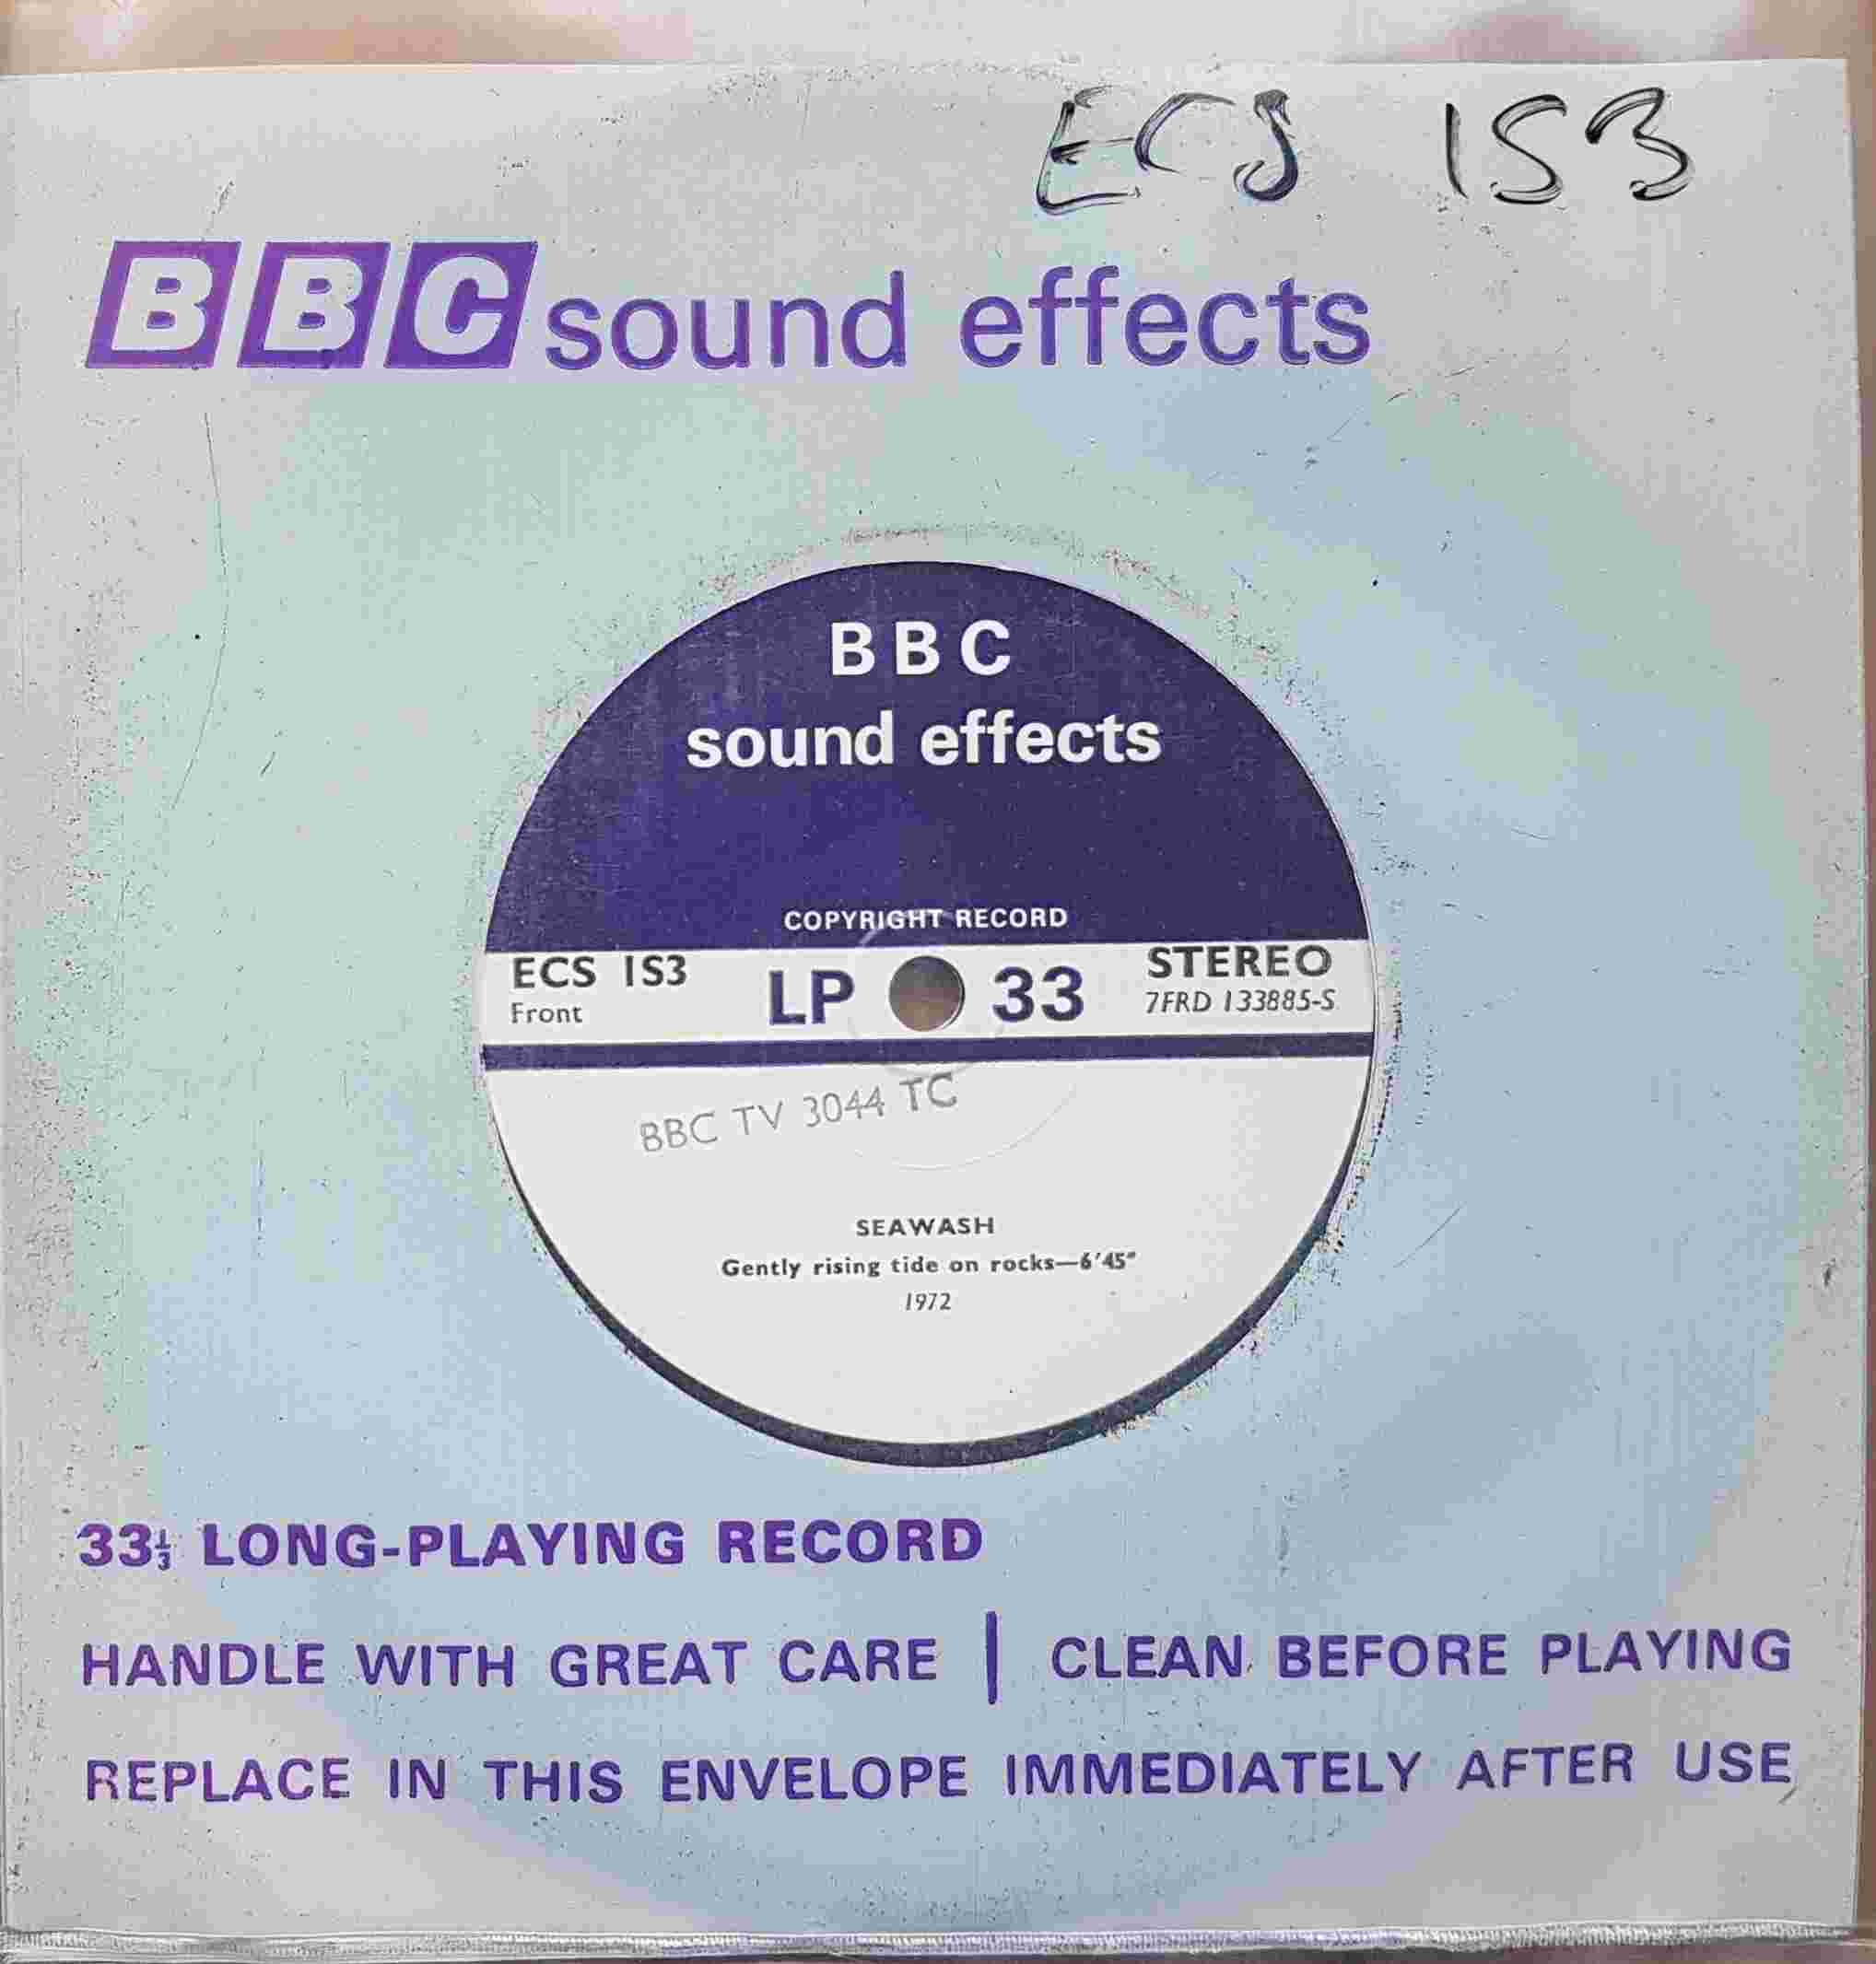 Picture of ECS 1S3 Seawash by artist Not registered from the BBC singles - Records and Tapes library